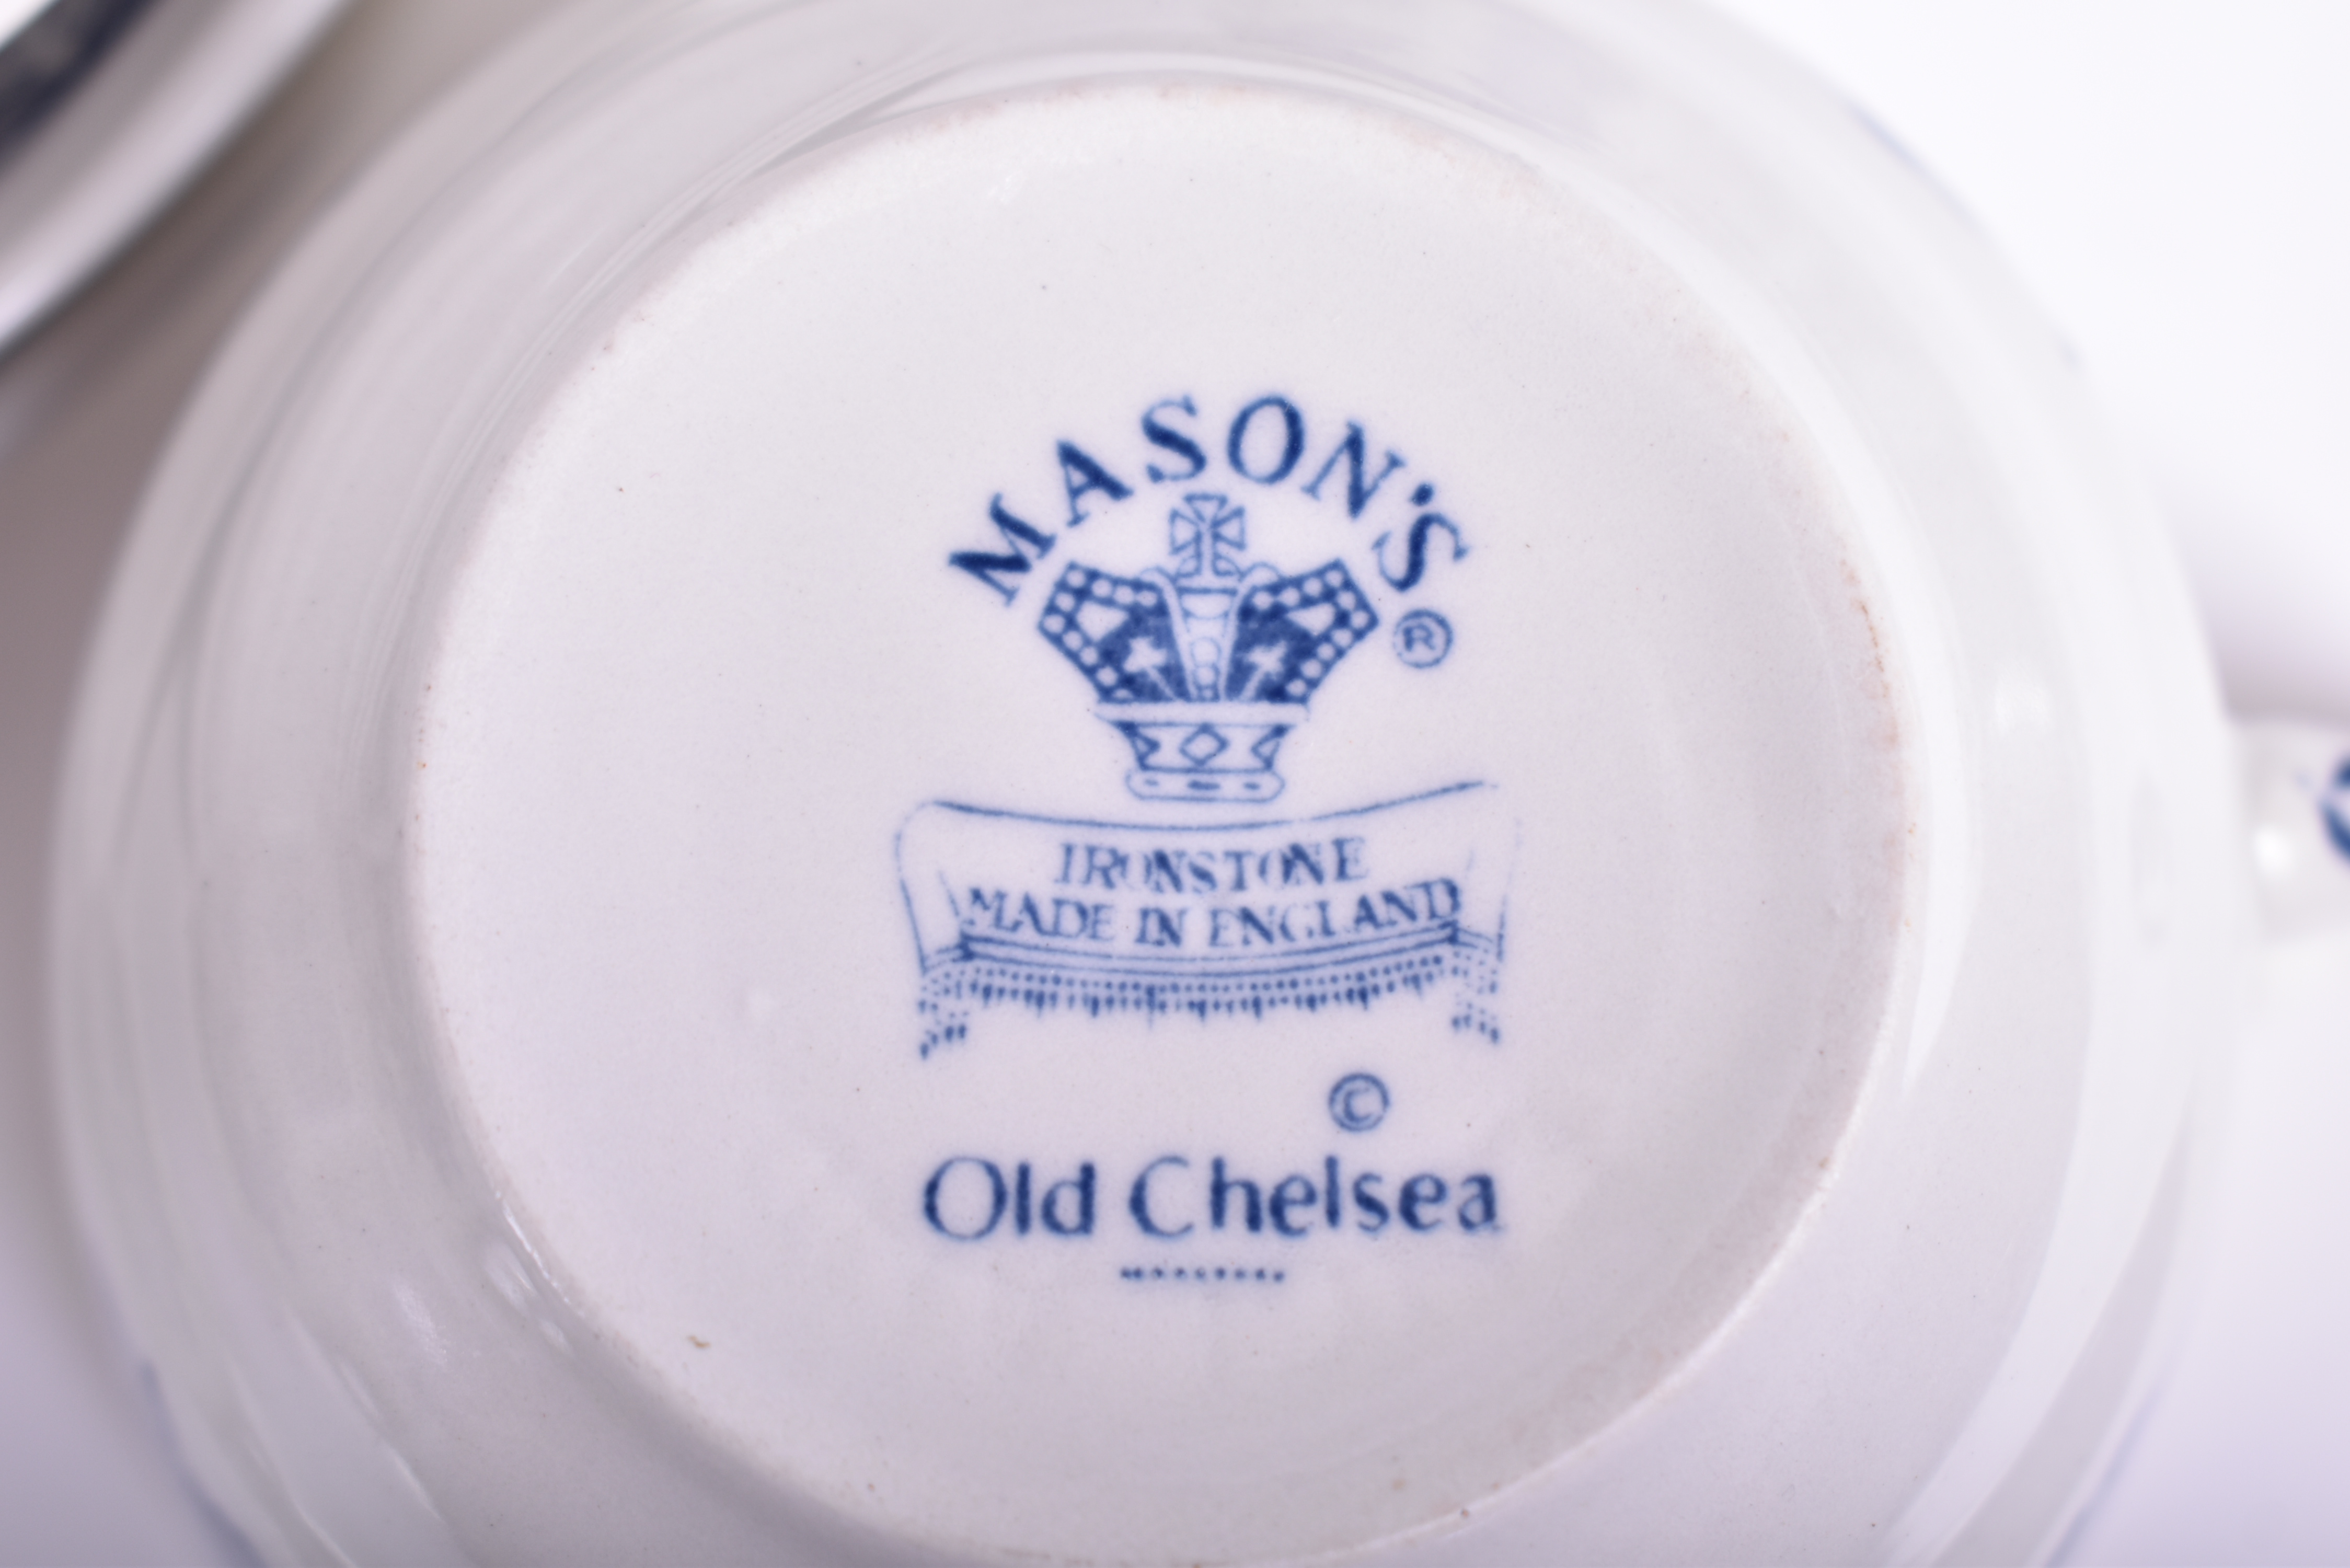 MASONS OLD CHELSEA PATTERN BLUE & WHITE DINNER SERVICE - Image 9 of 9